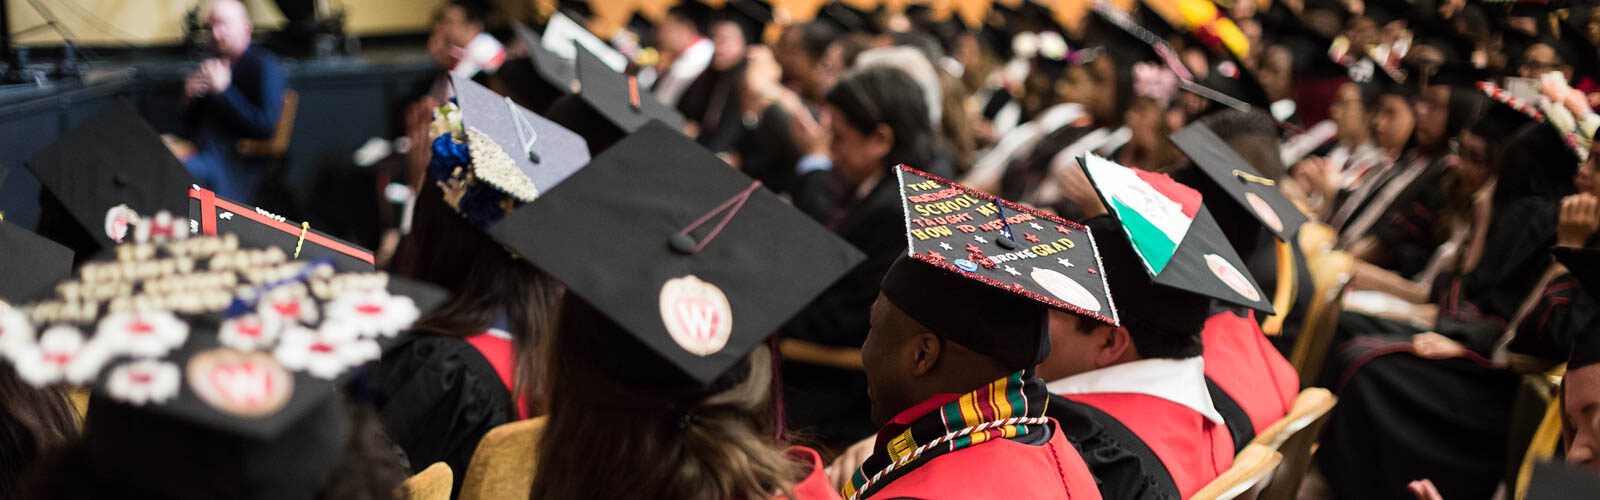 College graduates wearing decorated graduation caps sit in a theater at a graduation ceremony.